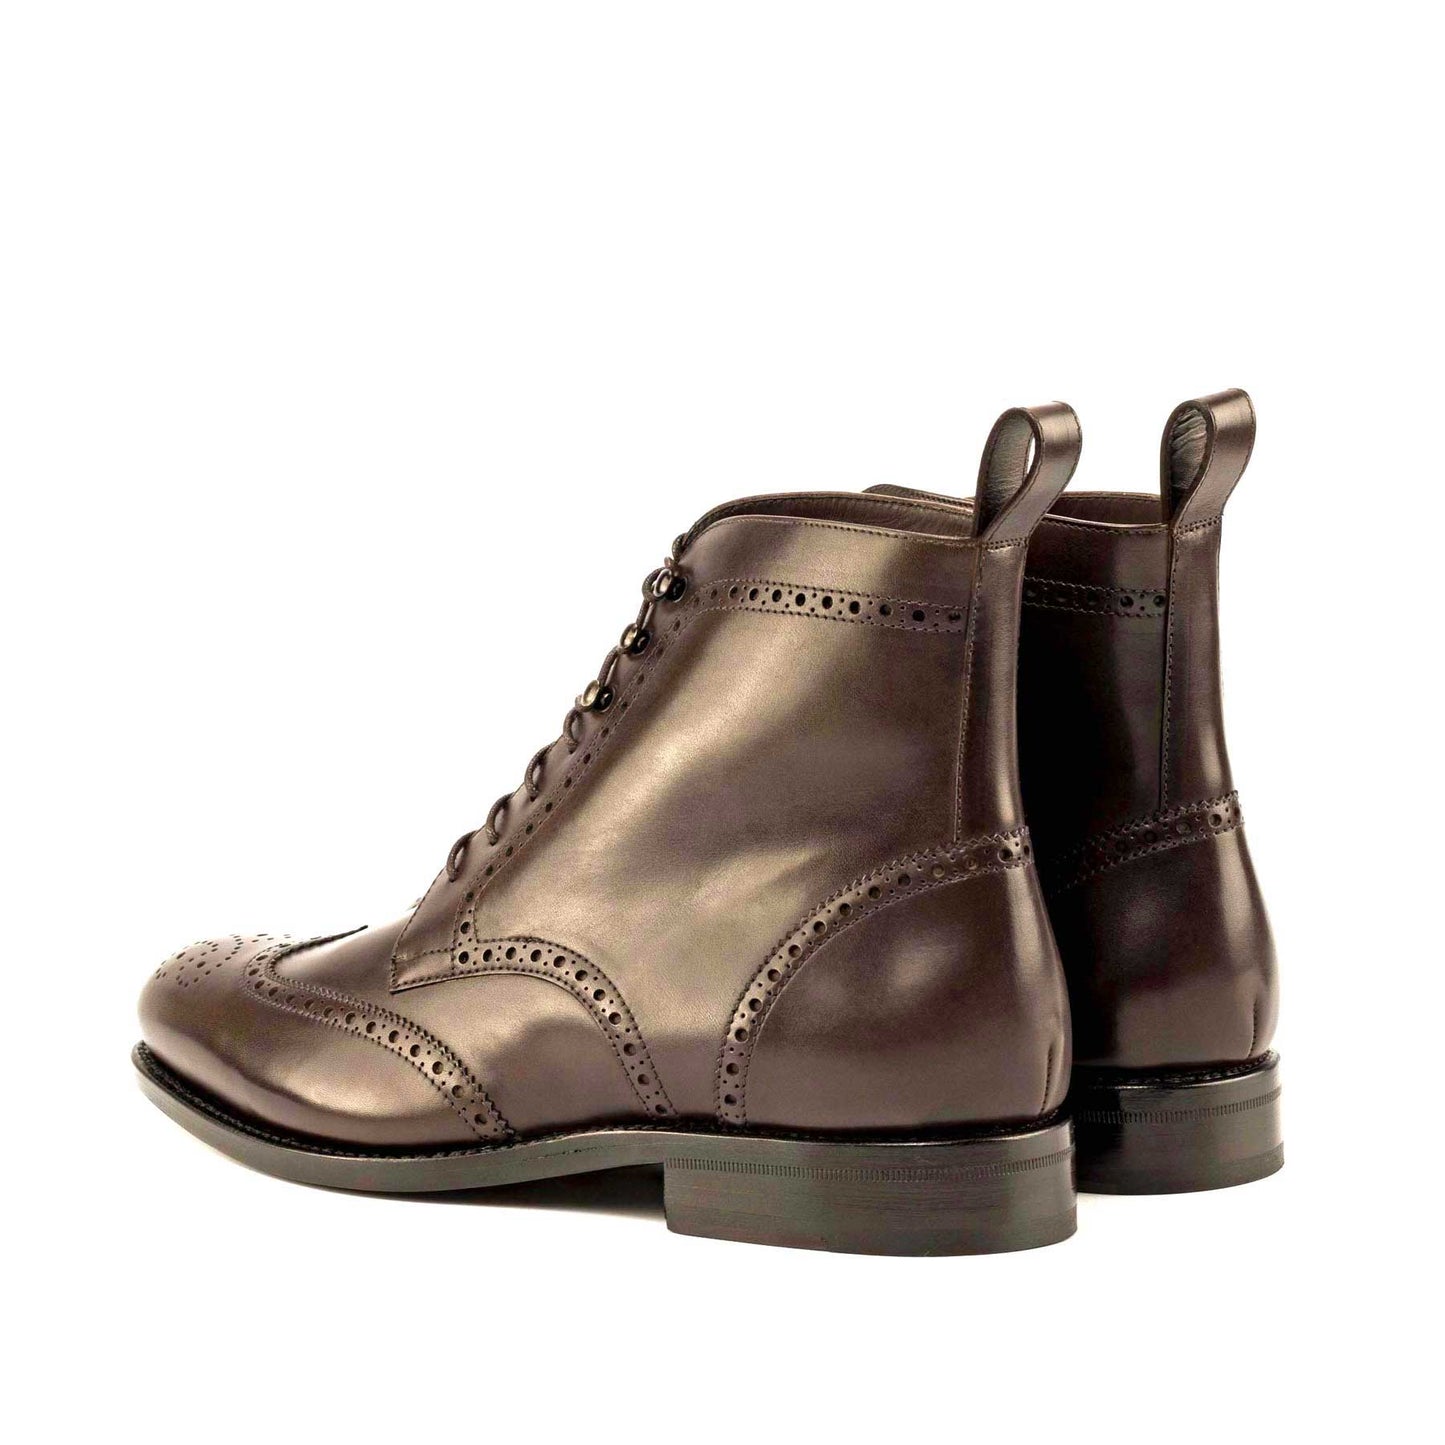 Full Brogue Boot in Dark Brown Box Calf - Zatorres | Free Shipping on orders over $200